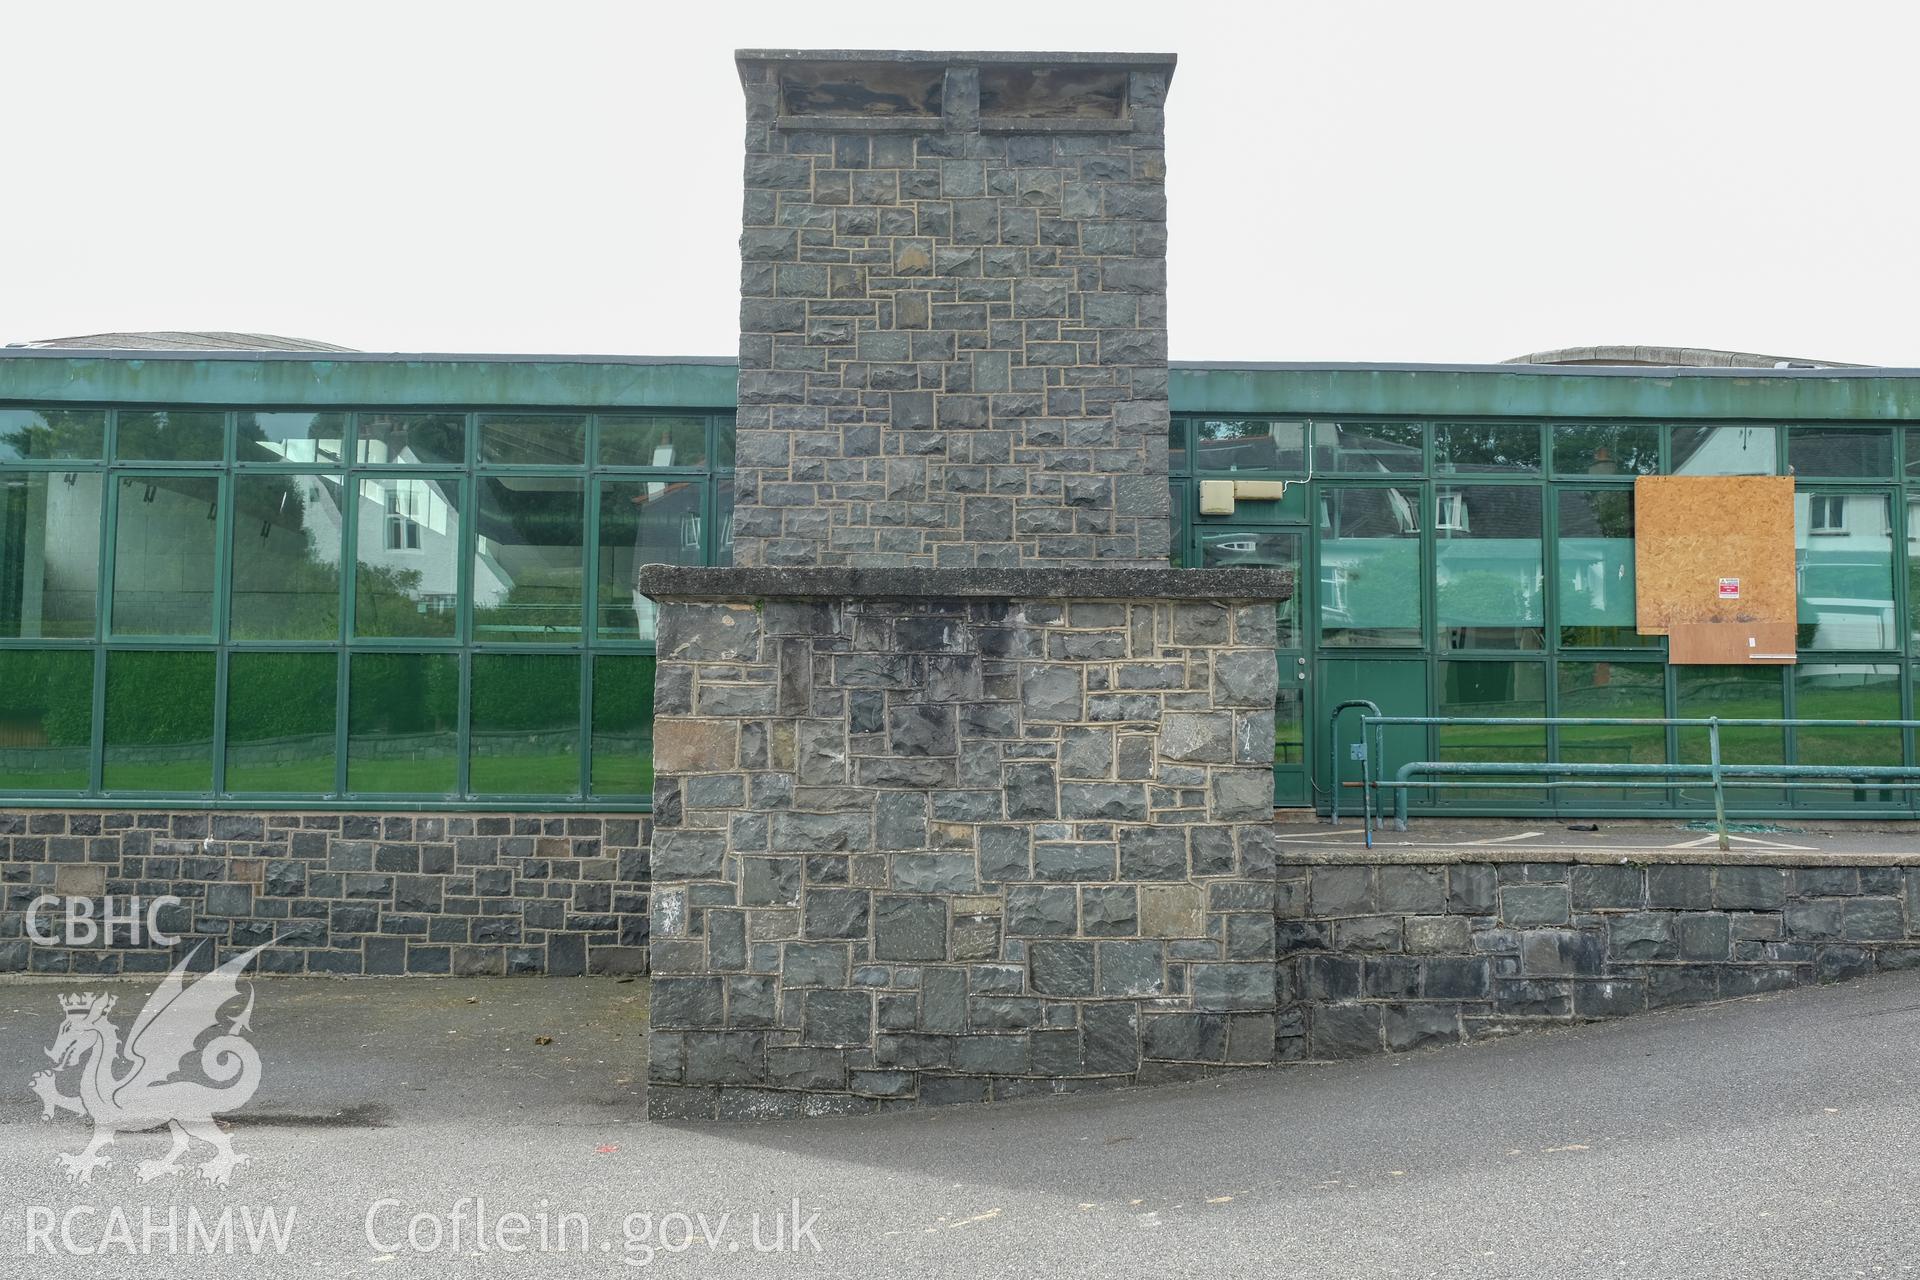 Digital colour photograph showing exterior view of a heavily fenestrated and stone wall at Caernarfonshire Technical College, Bangor. Photographed by Dilys Morgan and donated by Wyn Thomas of Grwp Llandrillo-Menai Further Education College, 2019.